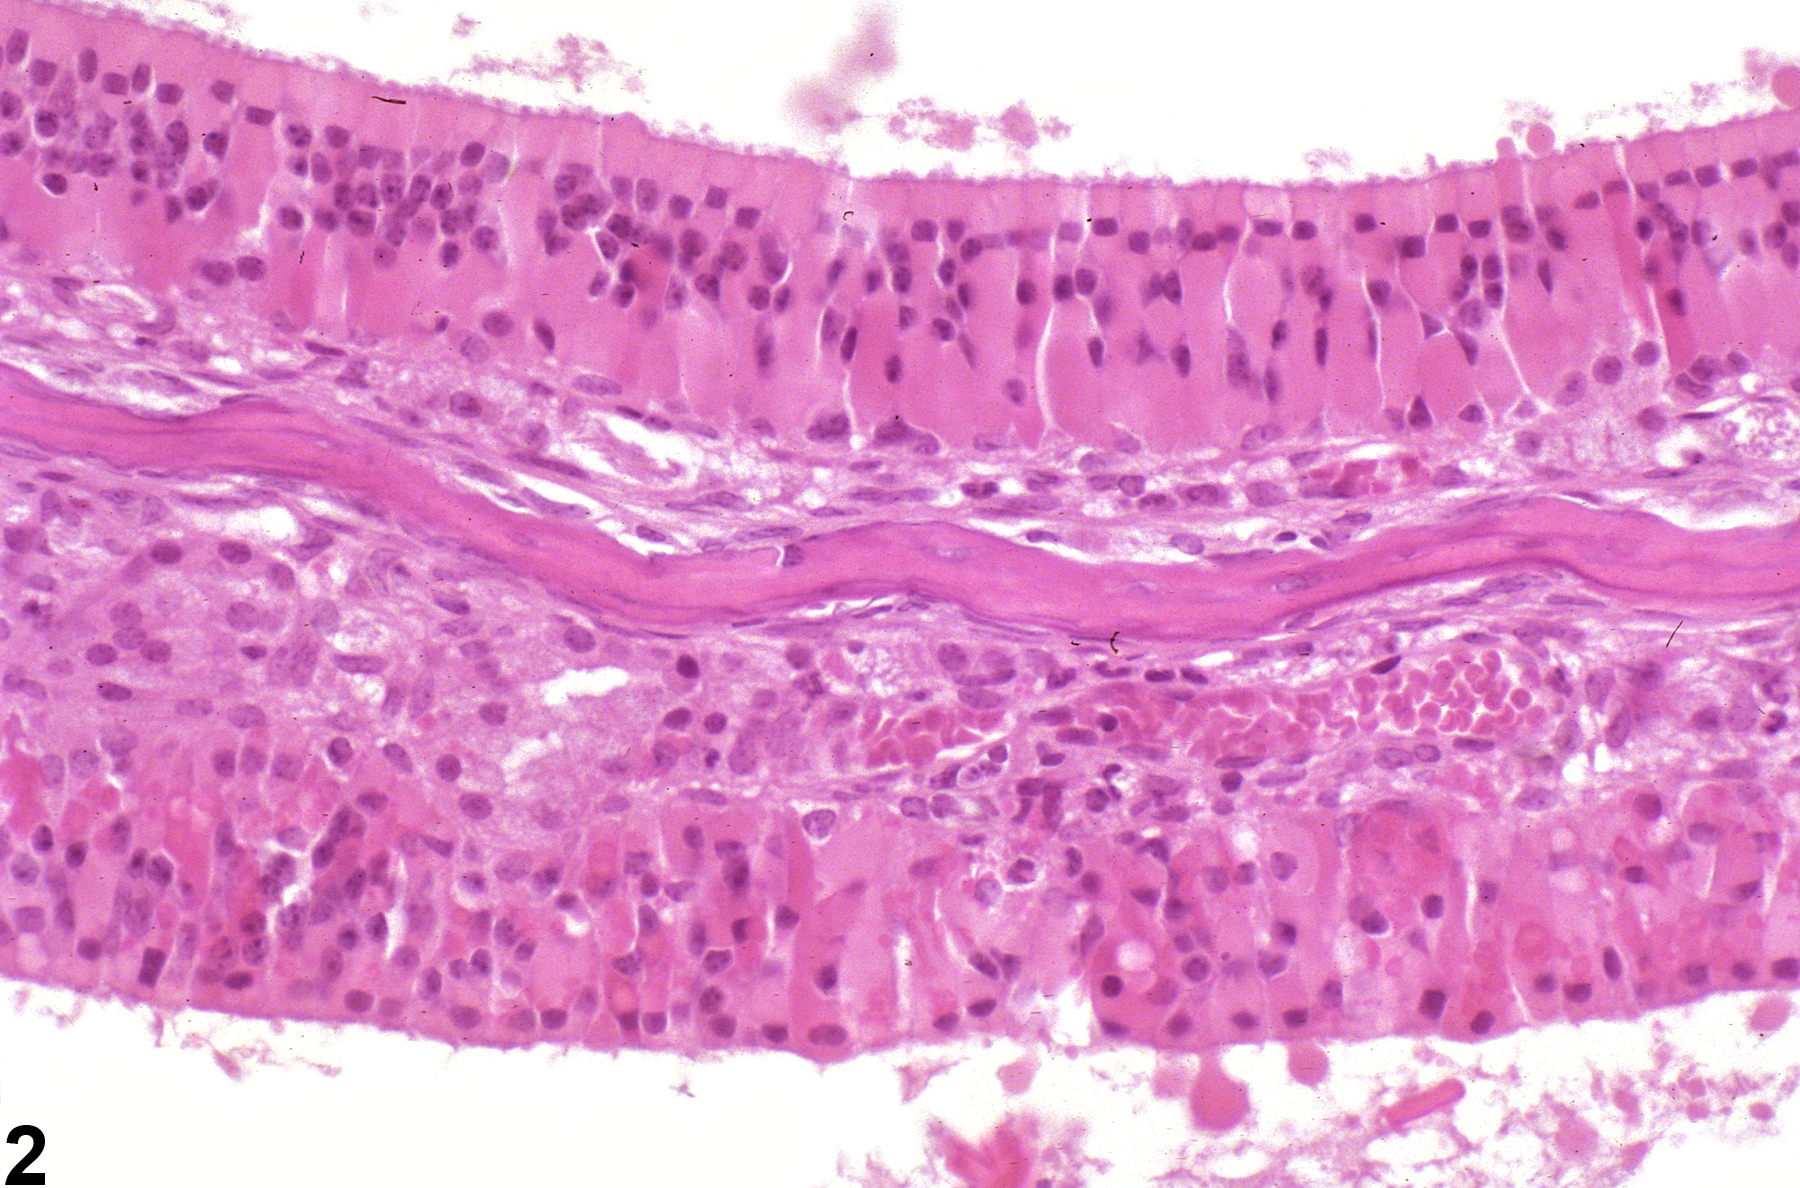 Image of accumulation, hyaline droplet in the nose, olfactory epithelium from a female B6C3F1/N mouse in a chronic study